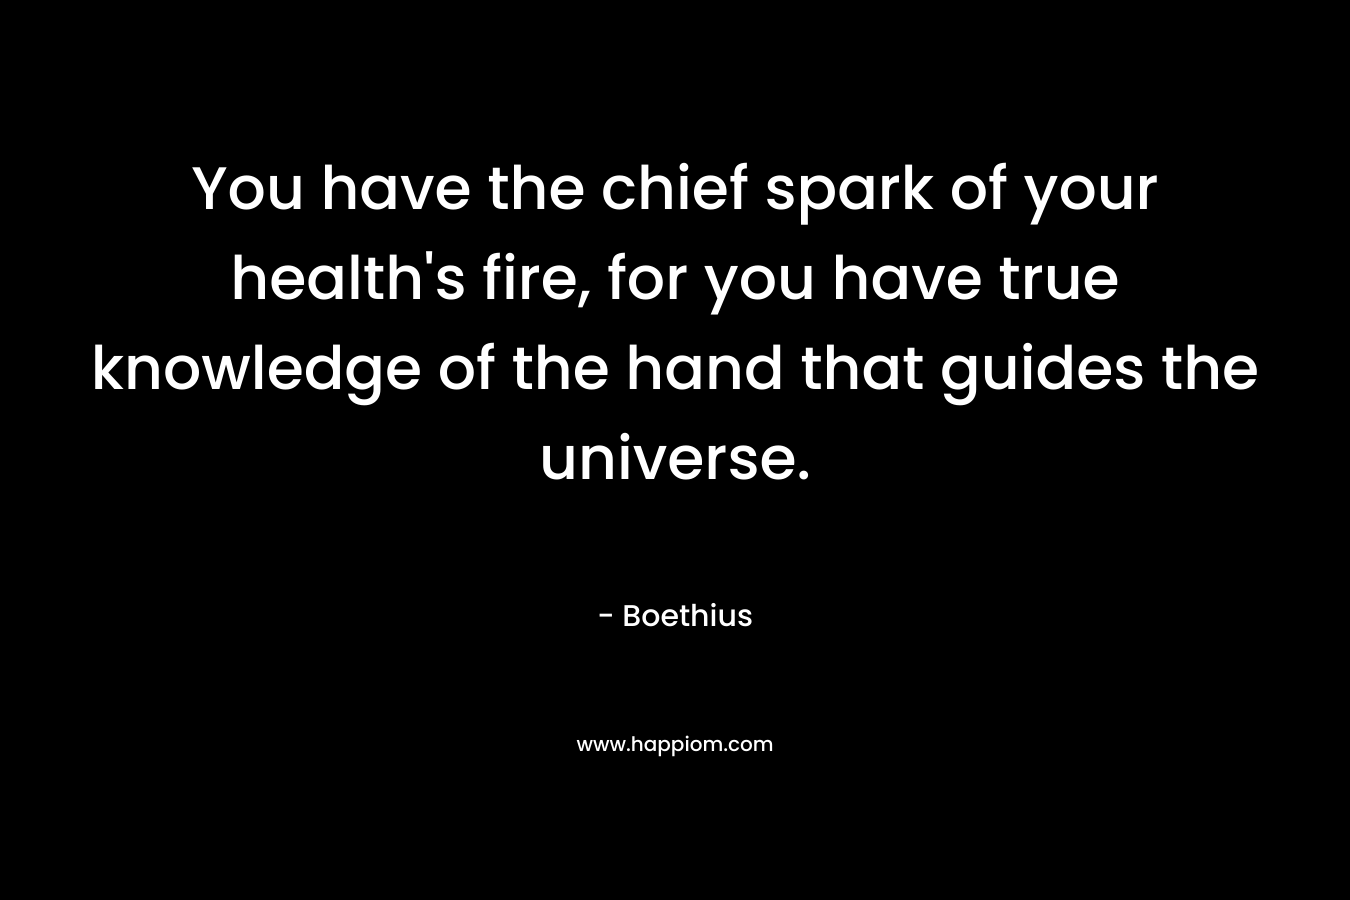 You have the chief spark of your health’s fire, for you have true knowledge of the hand that guides the universe. – Boethius